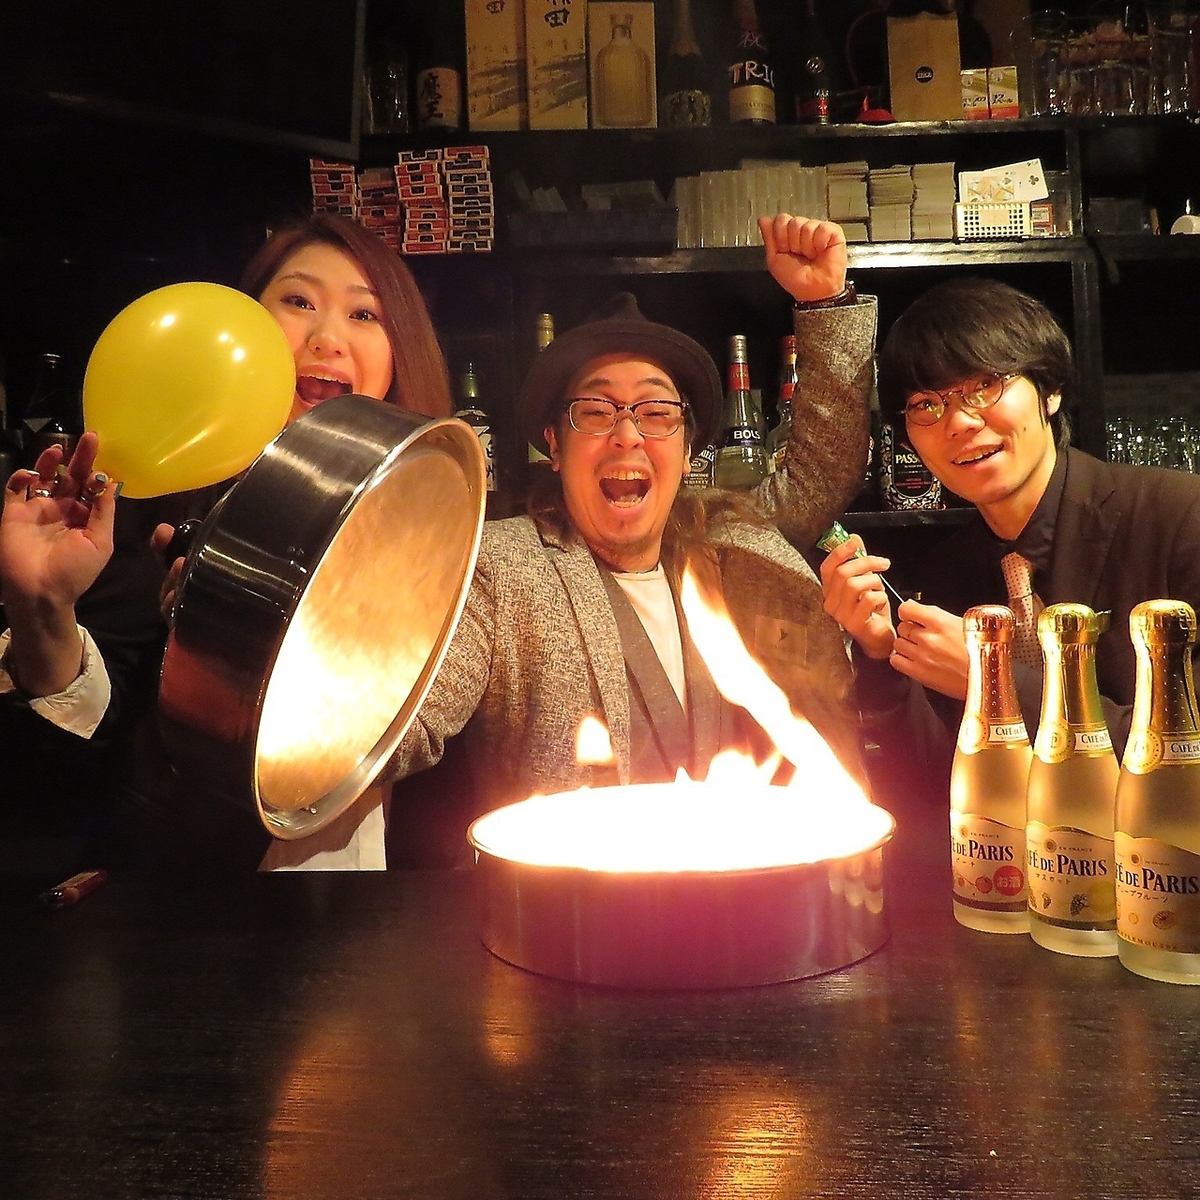 120 minutes of all-you-can-drink & magic viewing + champagne or cake included for 5,000 yen!!